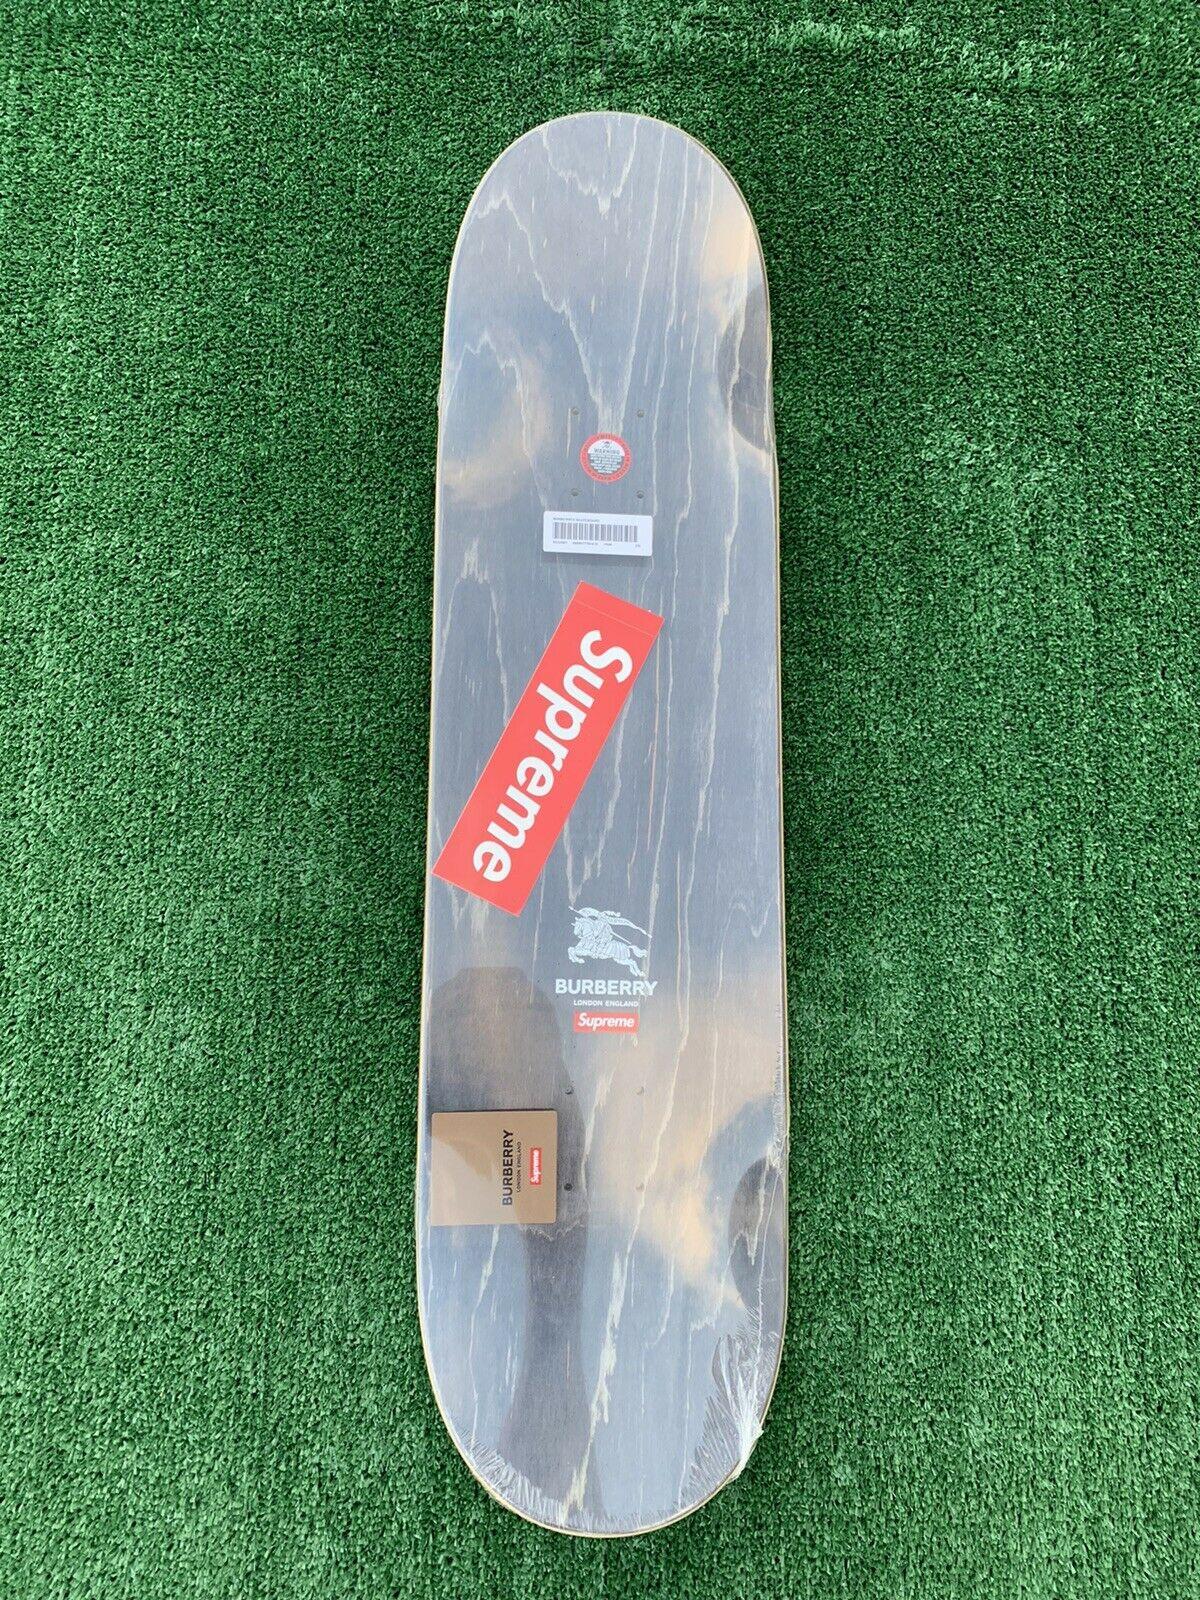 Supreme Collaboration with Burberry Pink Patterned Skateboard Deck For Sale 1